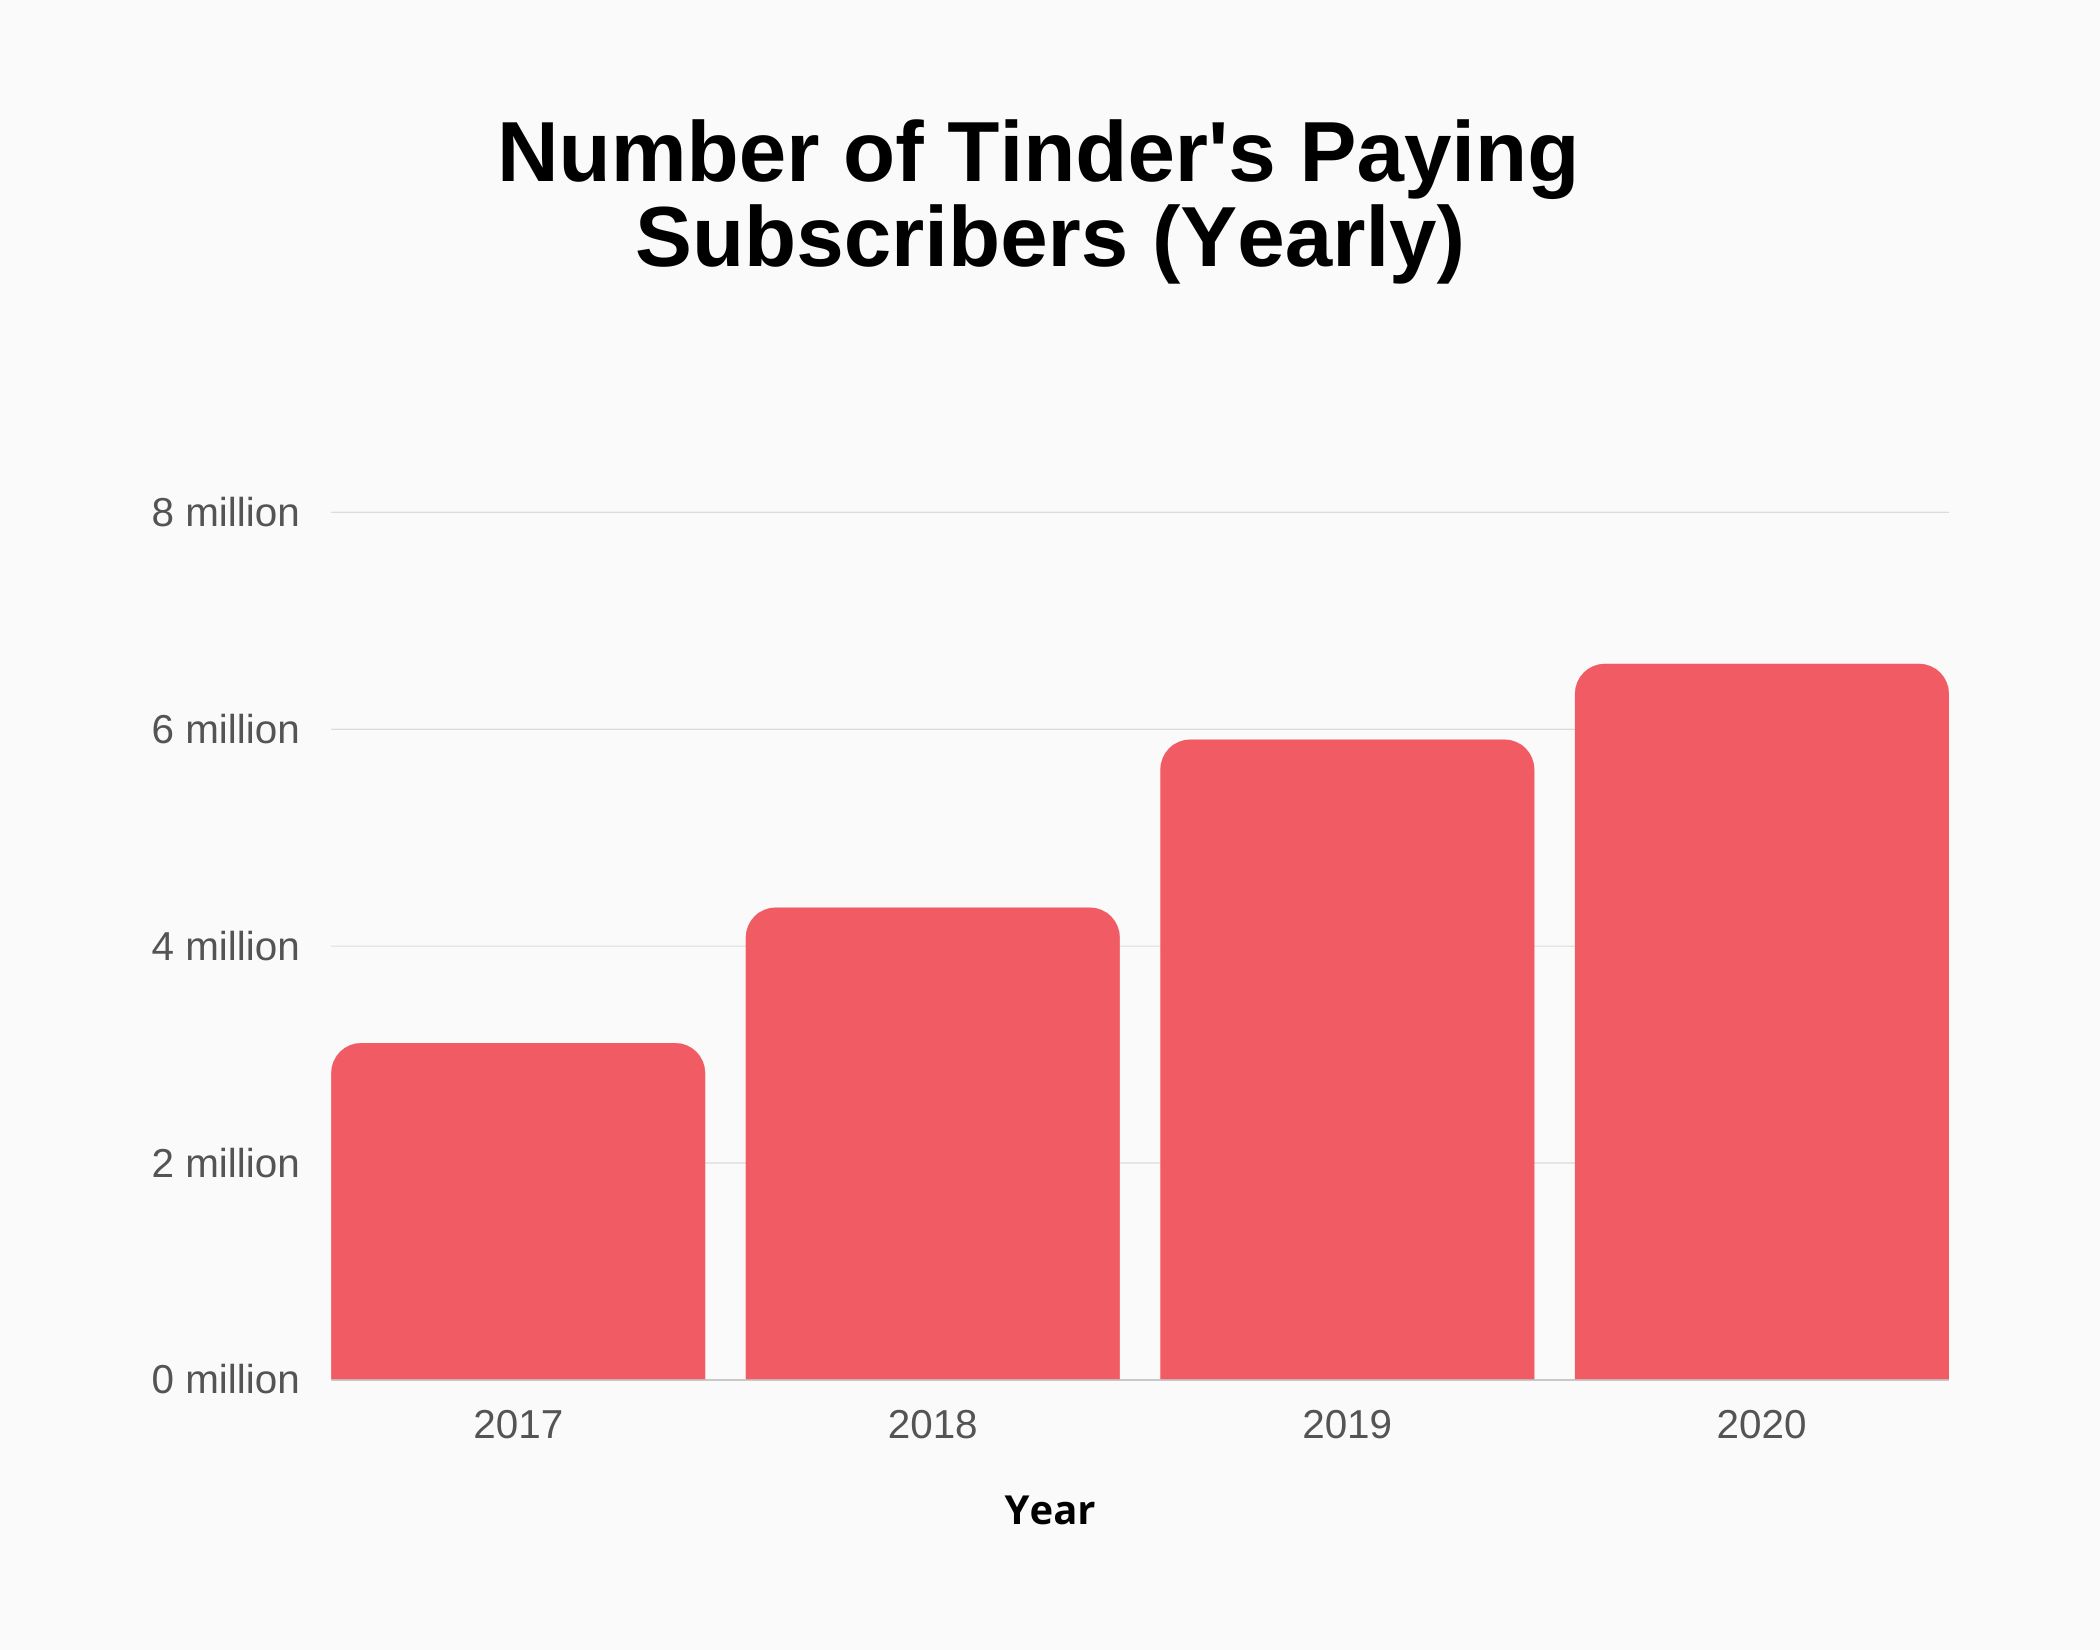 Tinder paid subscribed users